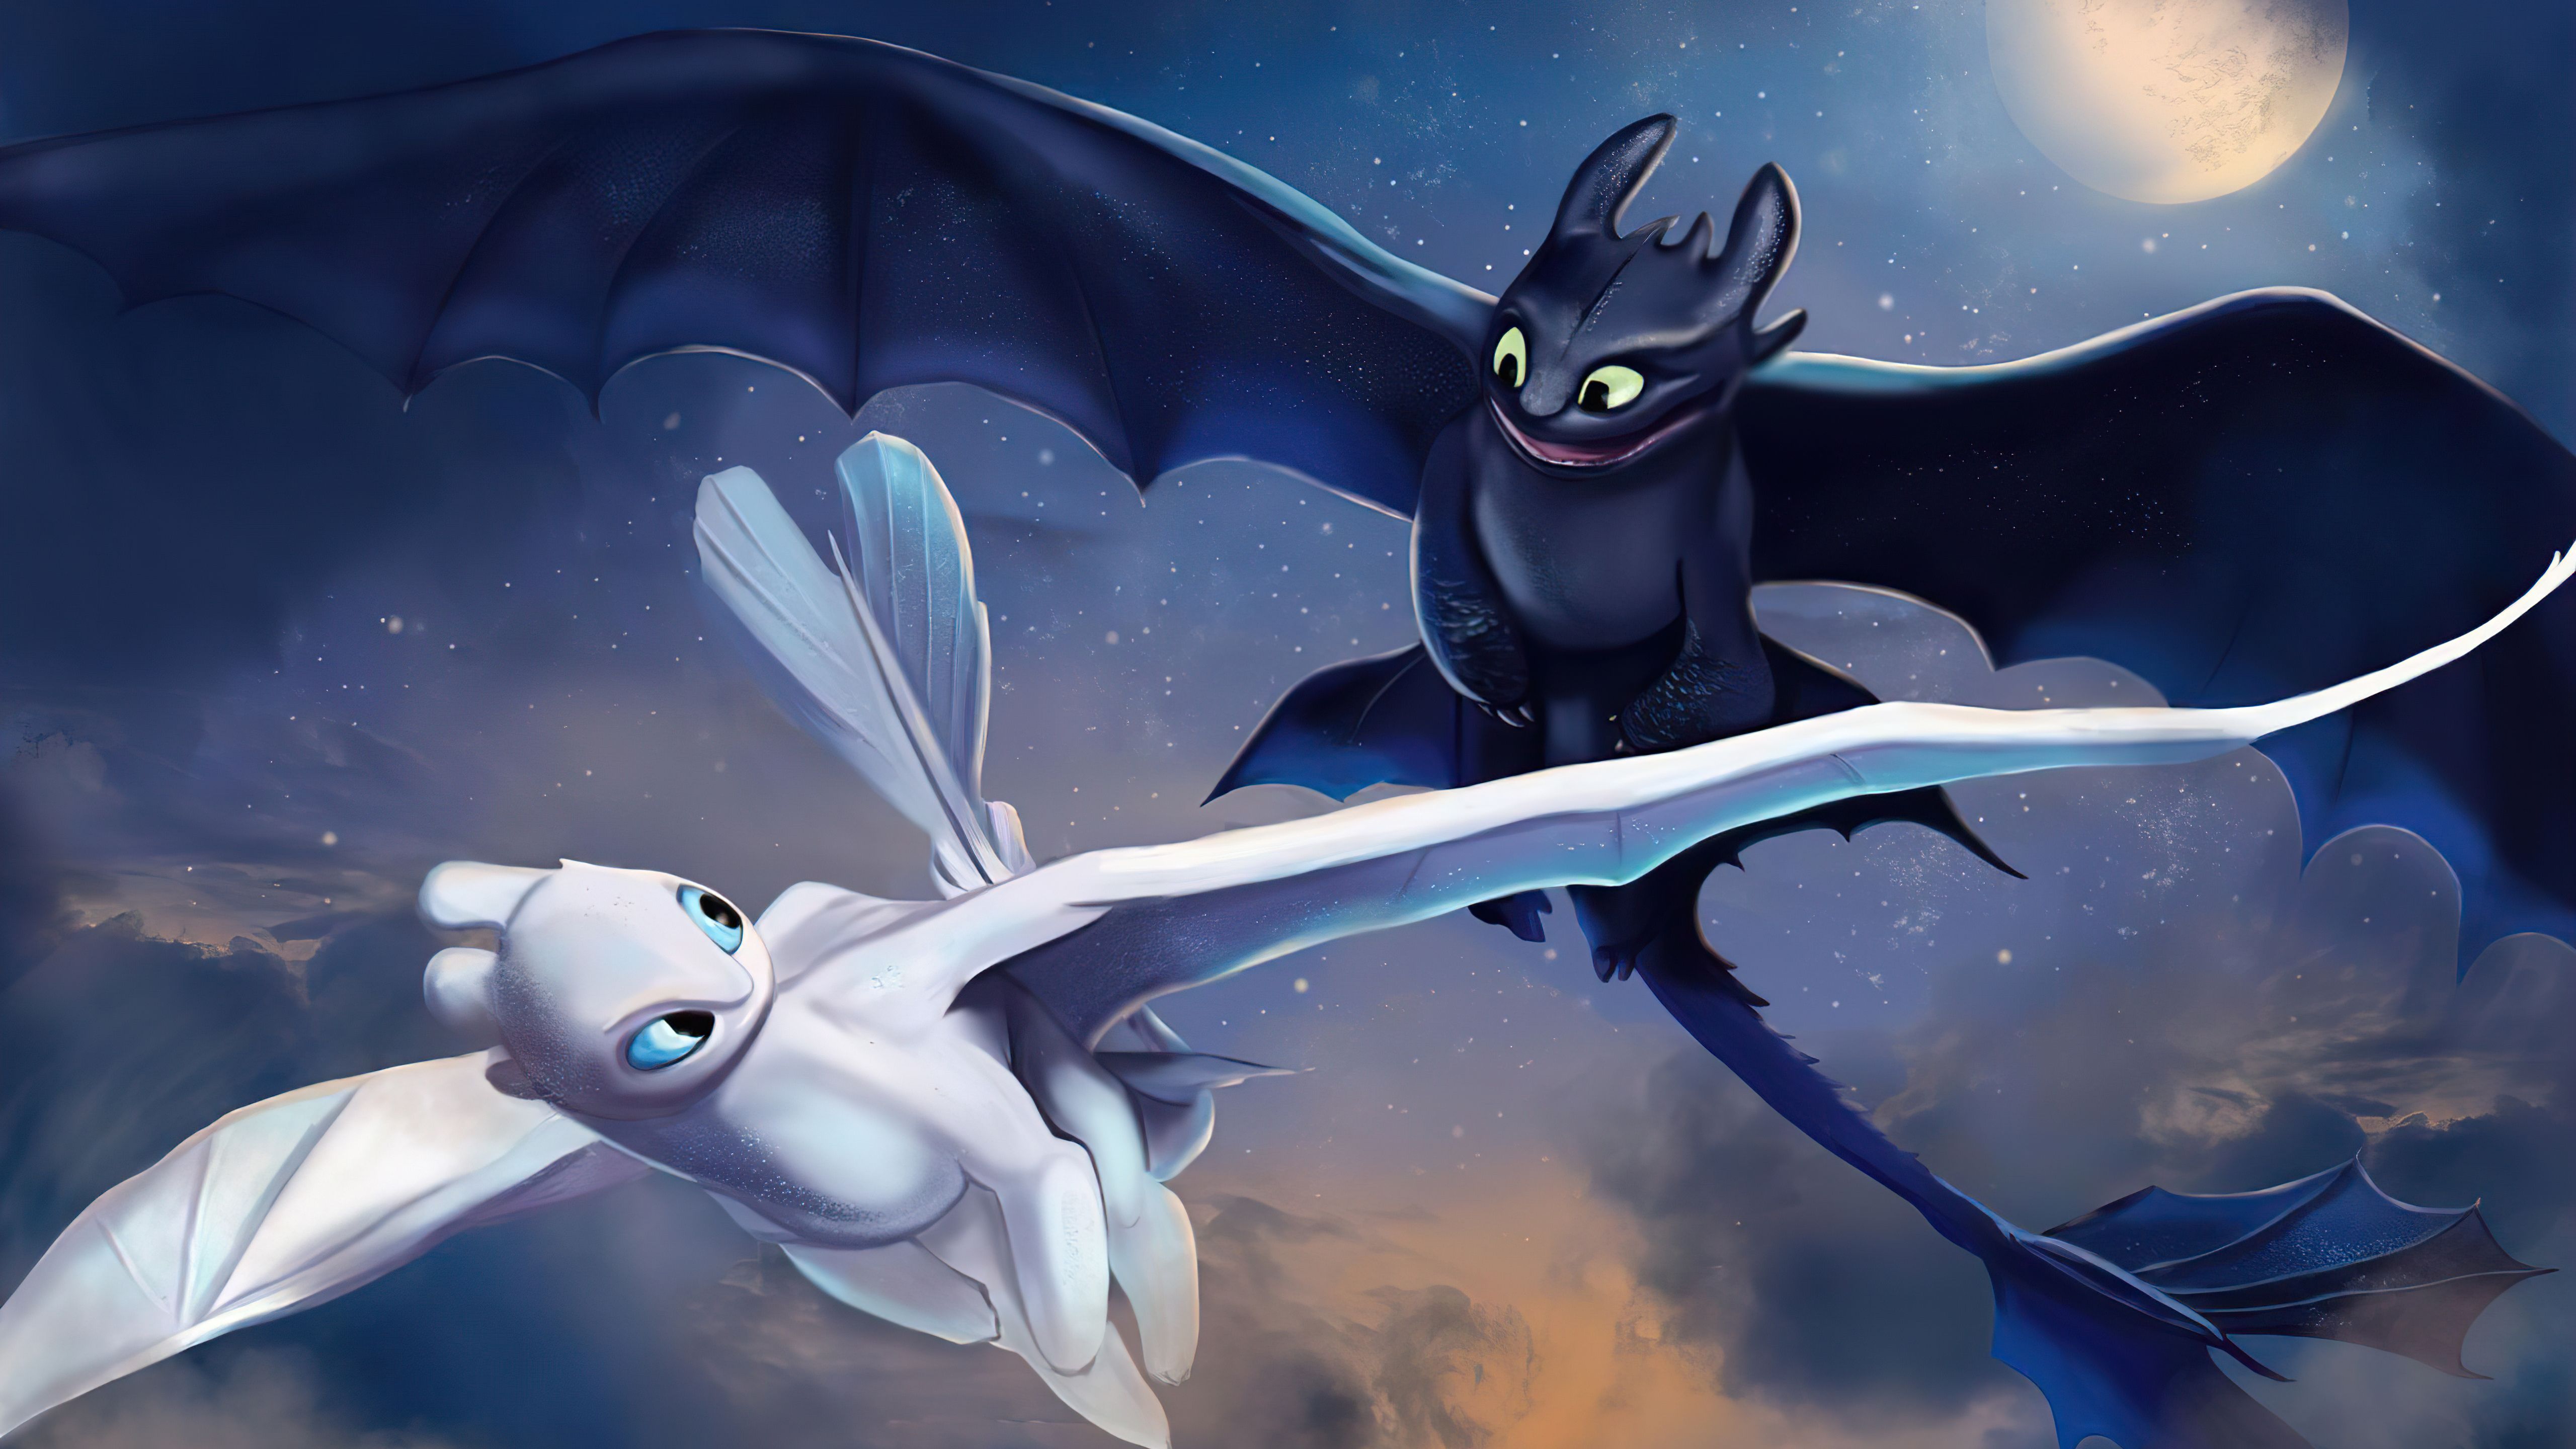 Toothless And The Lightfury Wallpapers Wallpaper Cave